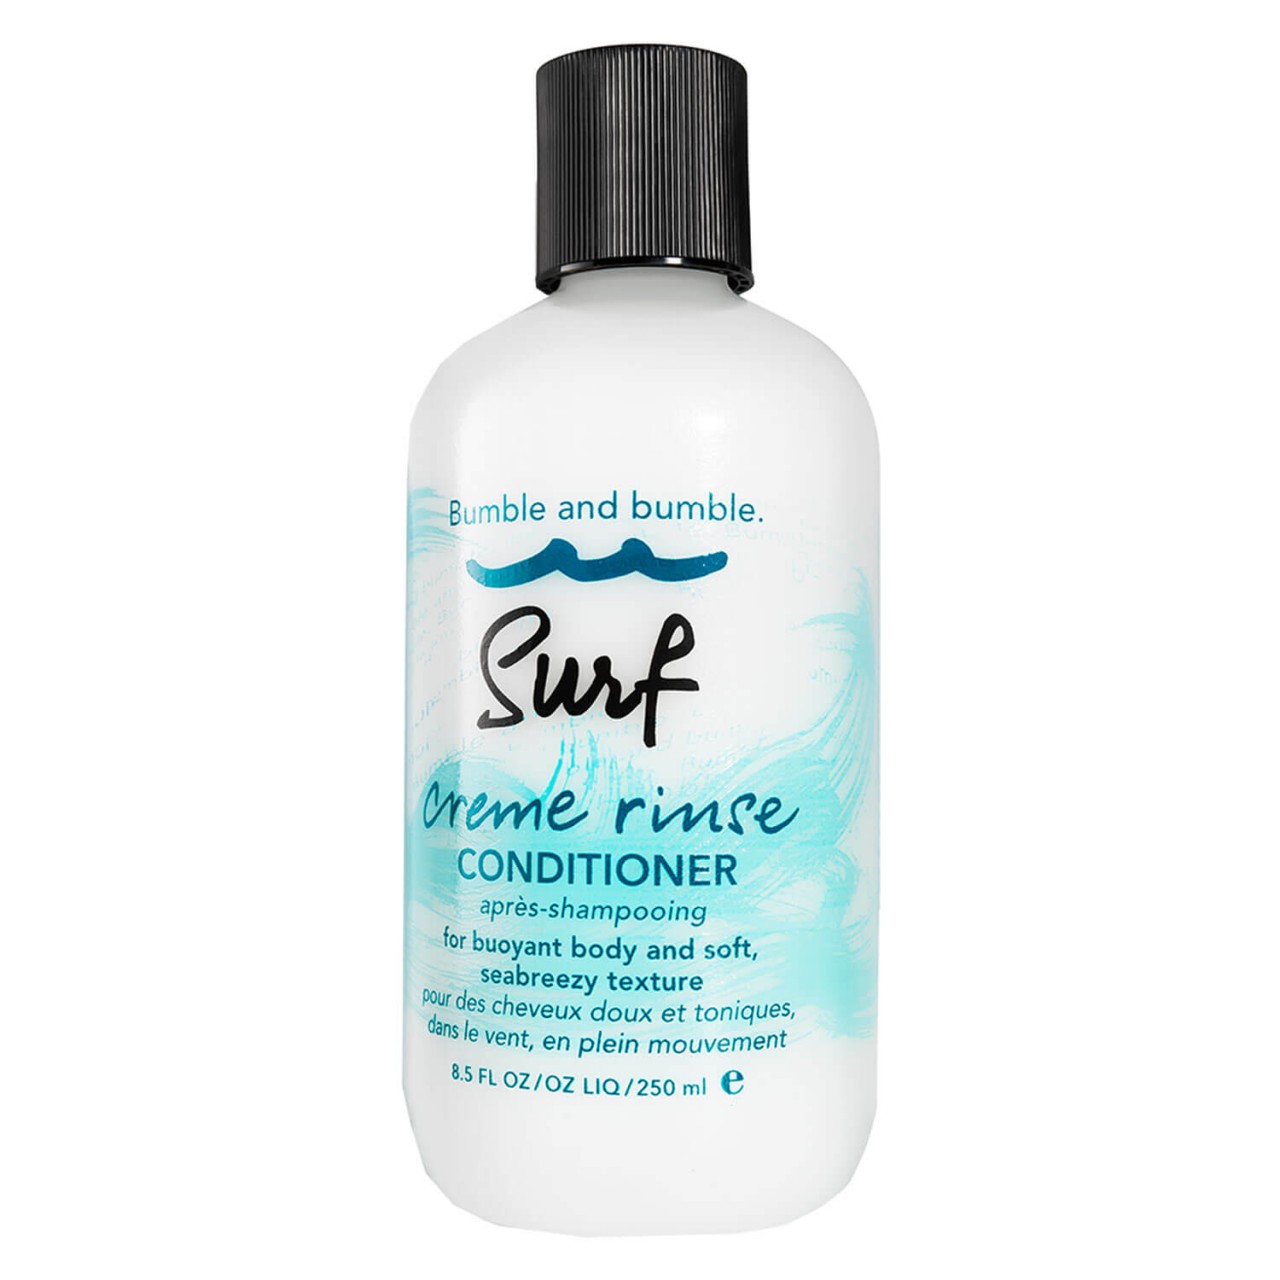 Bb. Surf - Creme Rinse Conditioner von Bumble and bumble.